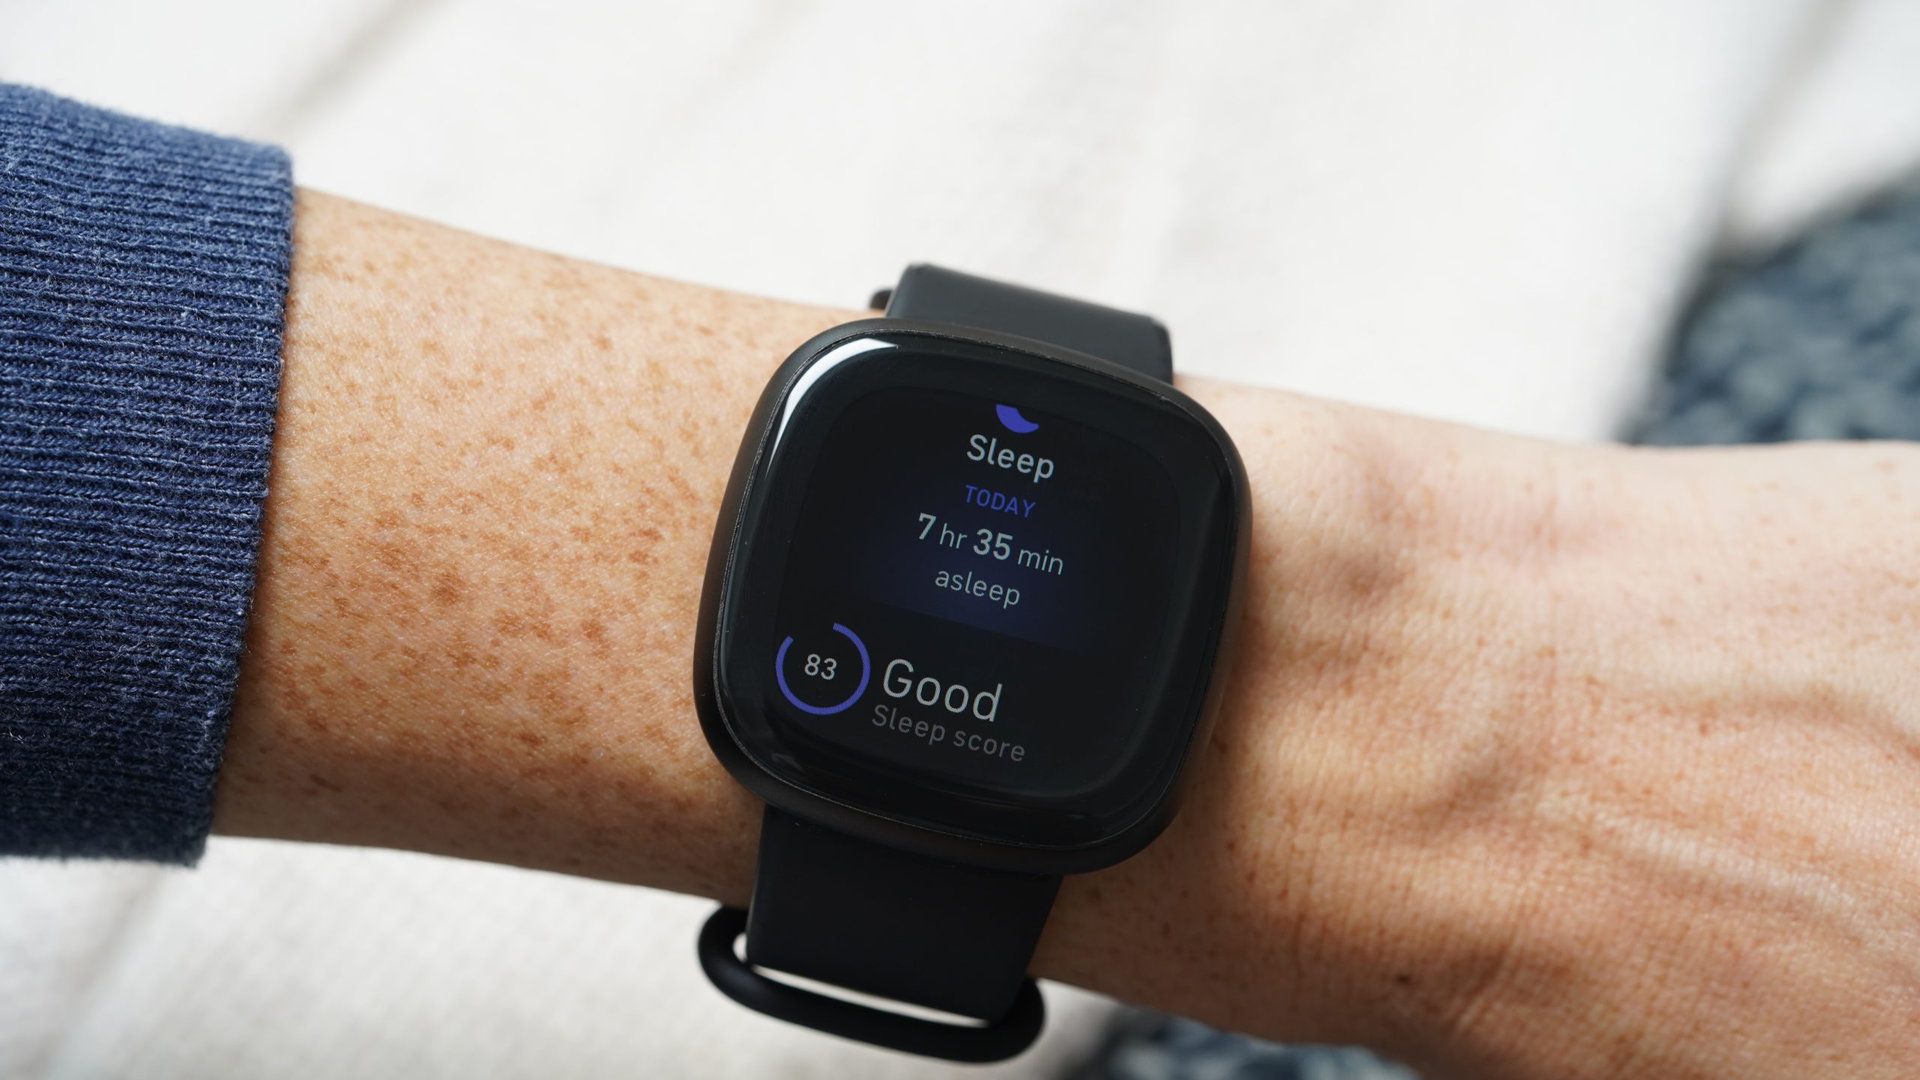 A Fitbit Versa 3 on a user's wrist displays their total sleep time and a sleep score.